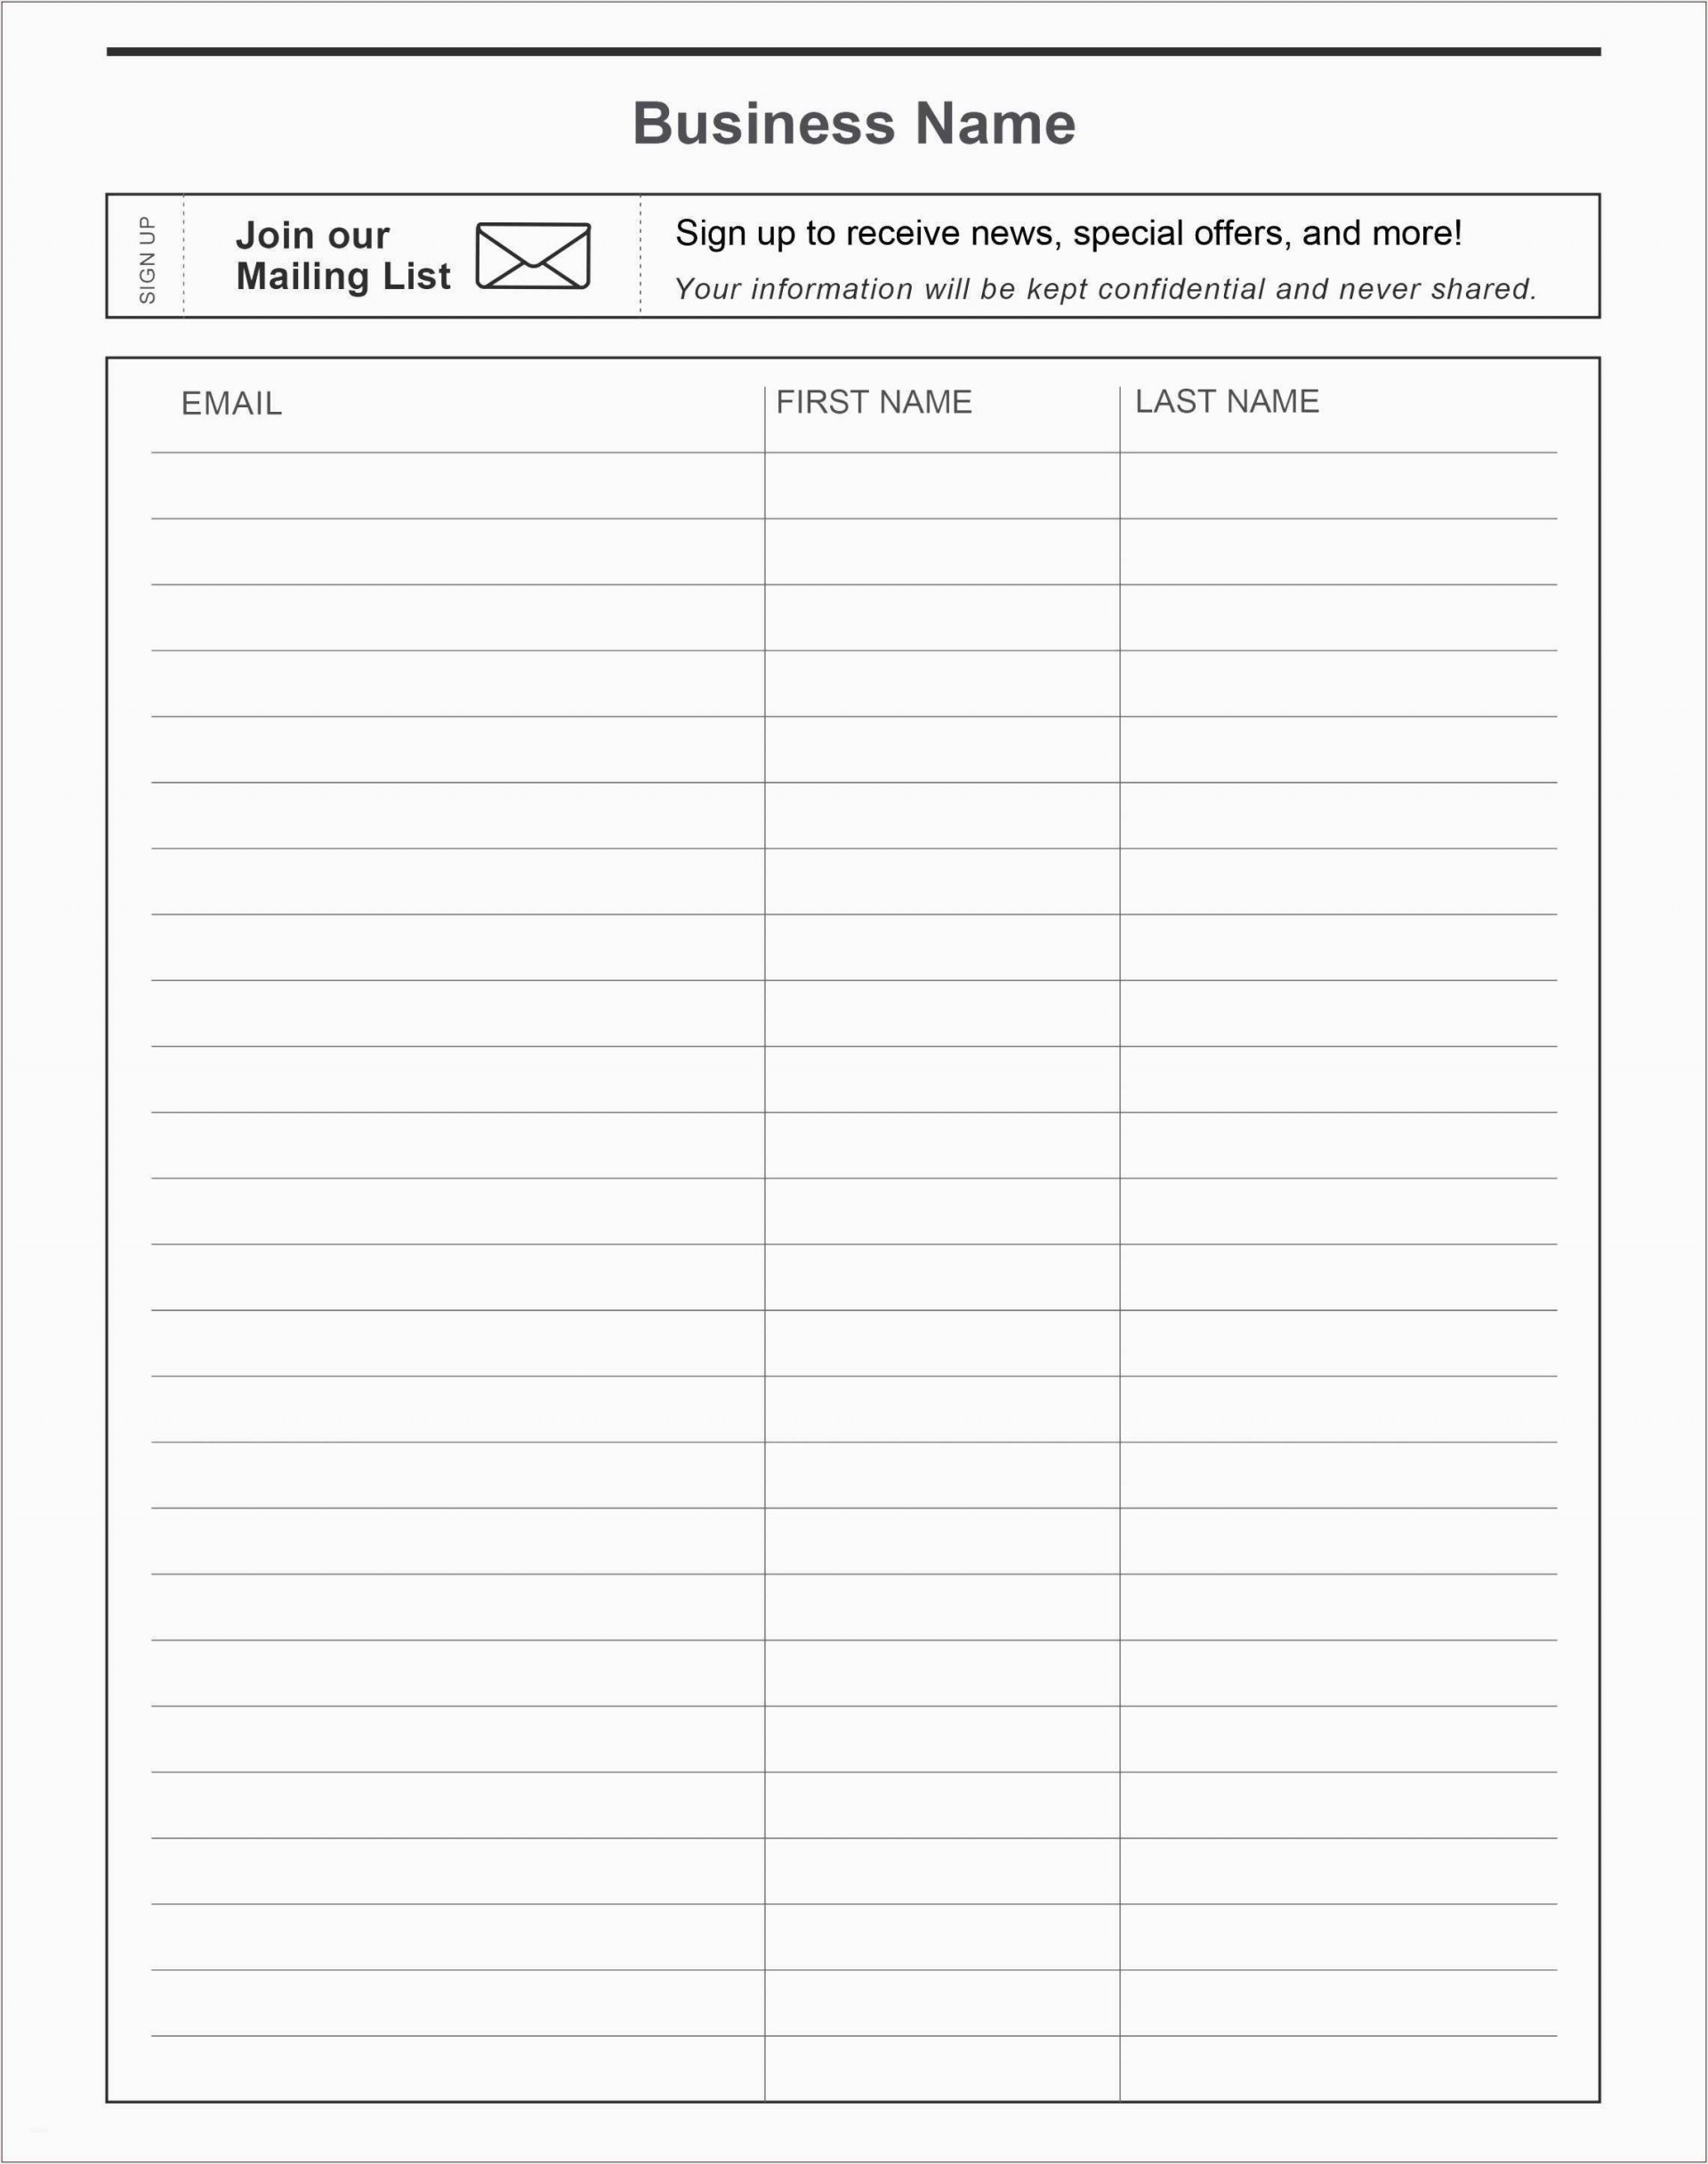 026 Best Photos Of Potluck Sign Up Sheet Excel Printable Food Day - Free Printable Sign Up Sheet